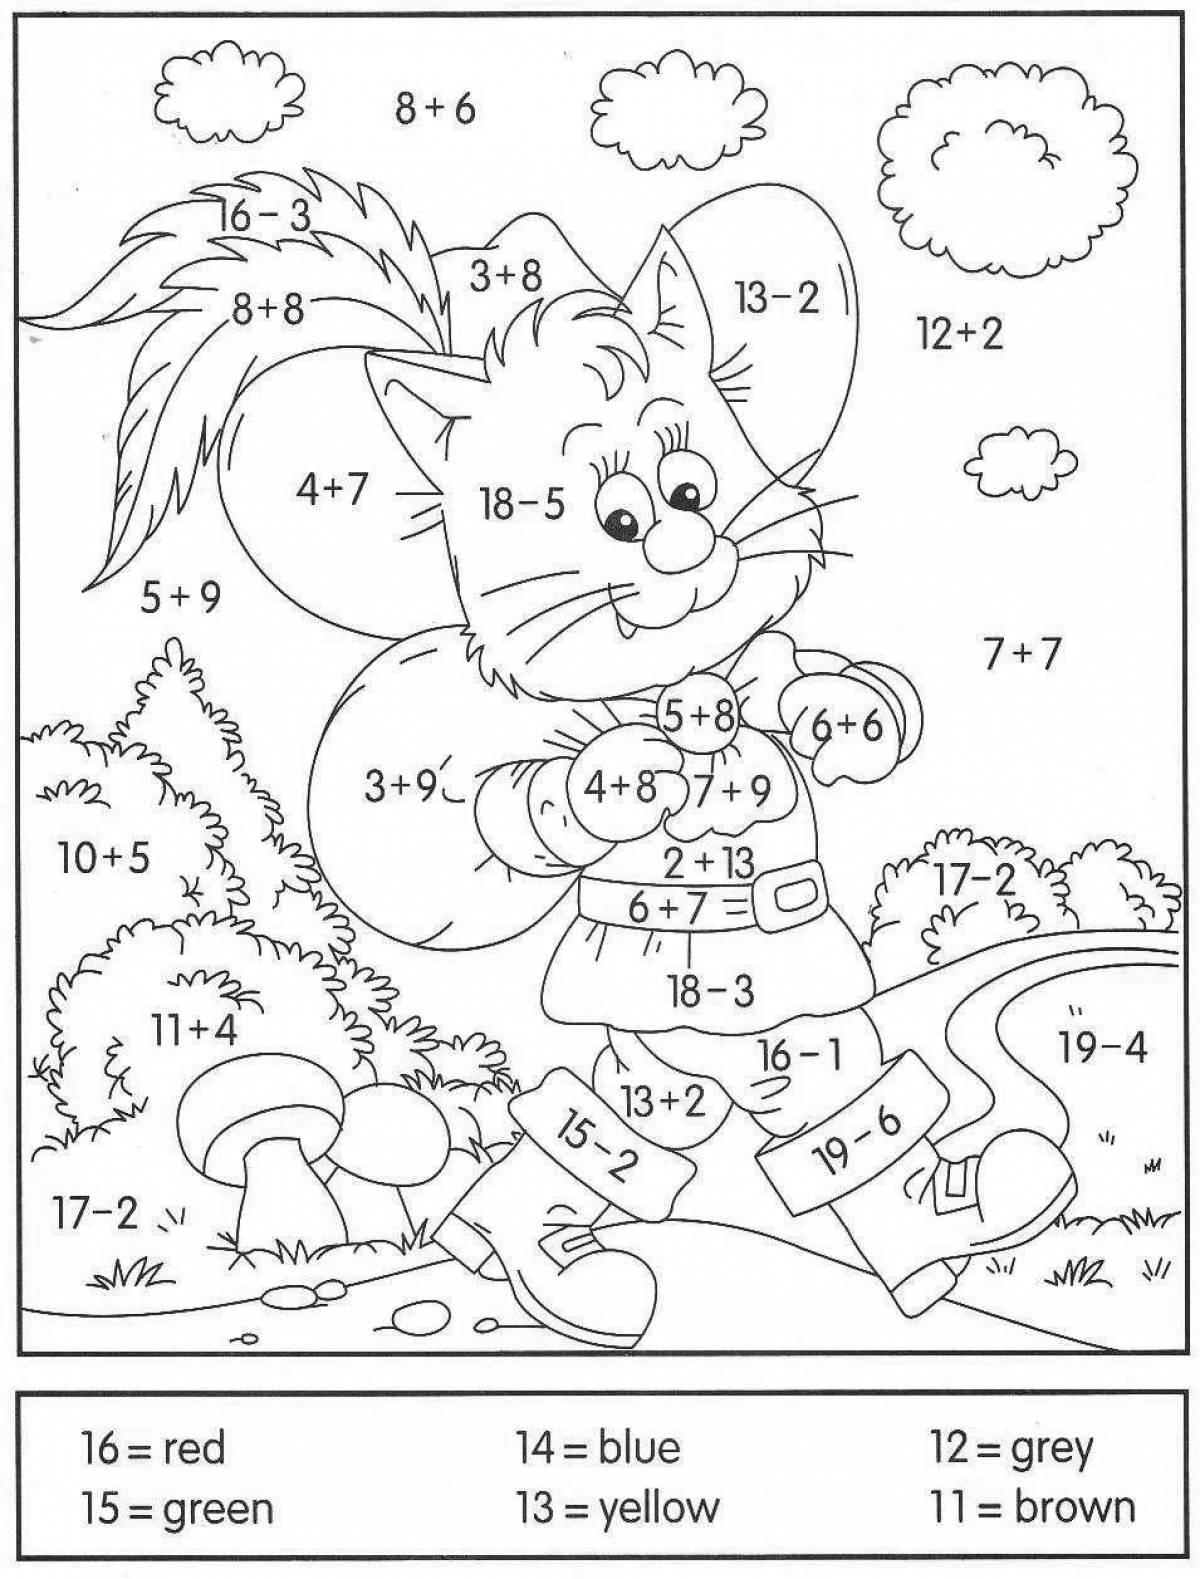 Happy coloring for math grade 2 addition and subtraction within 20